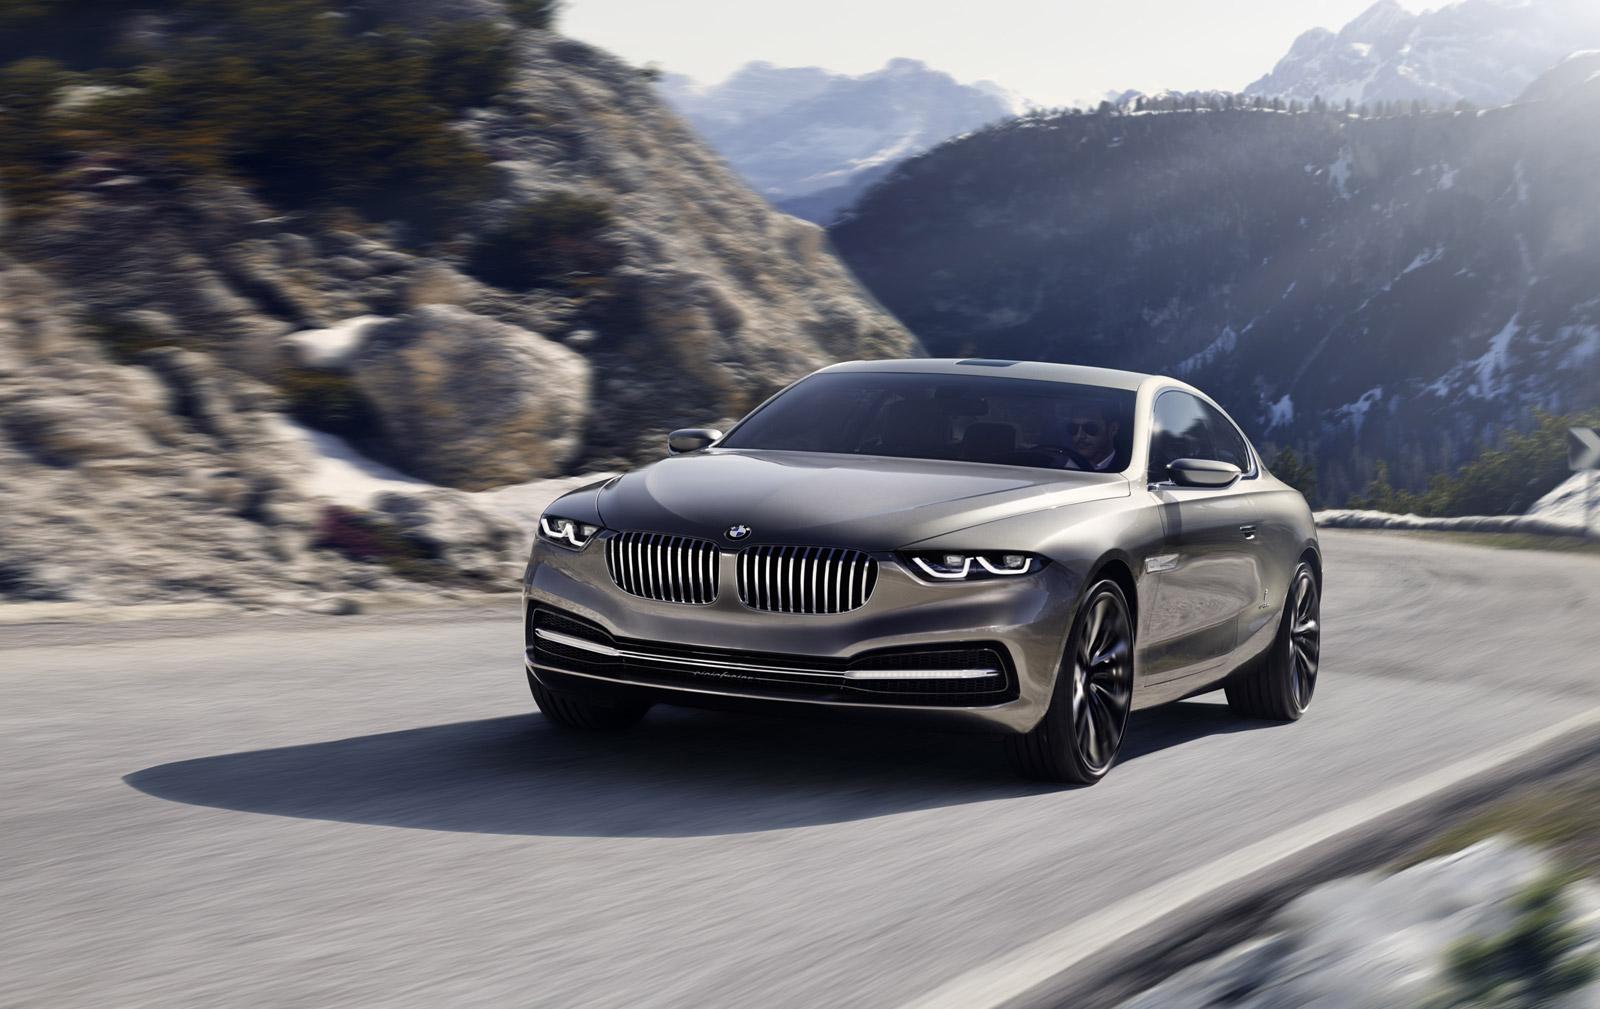 Report: New BMW 8 Series Due In 2020